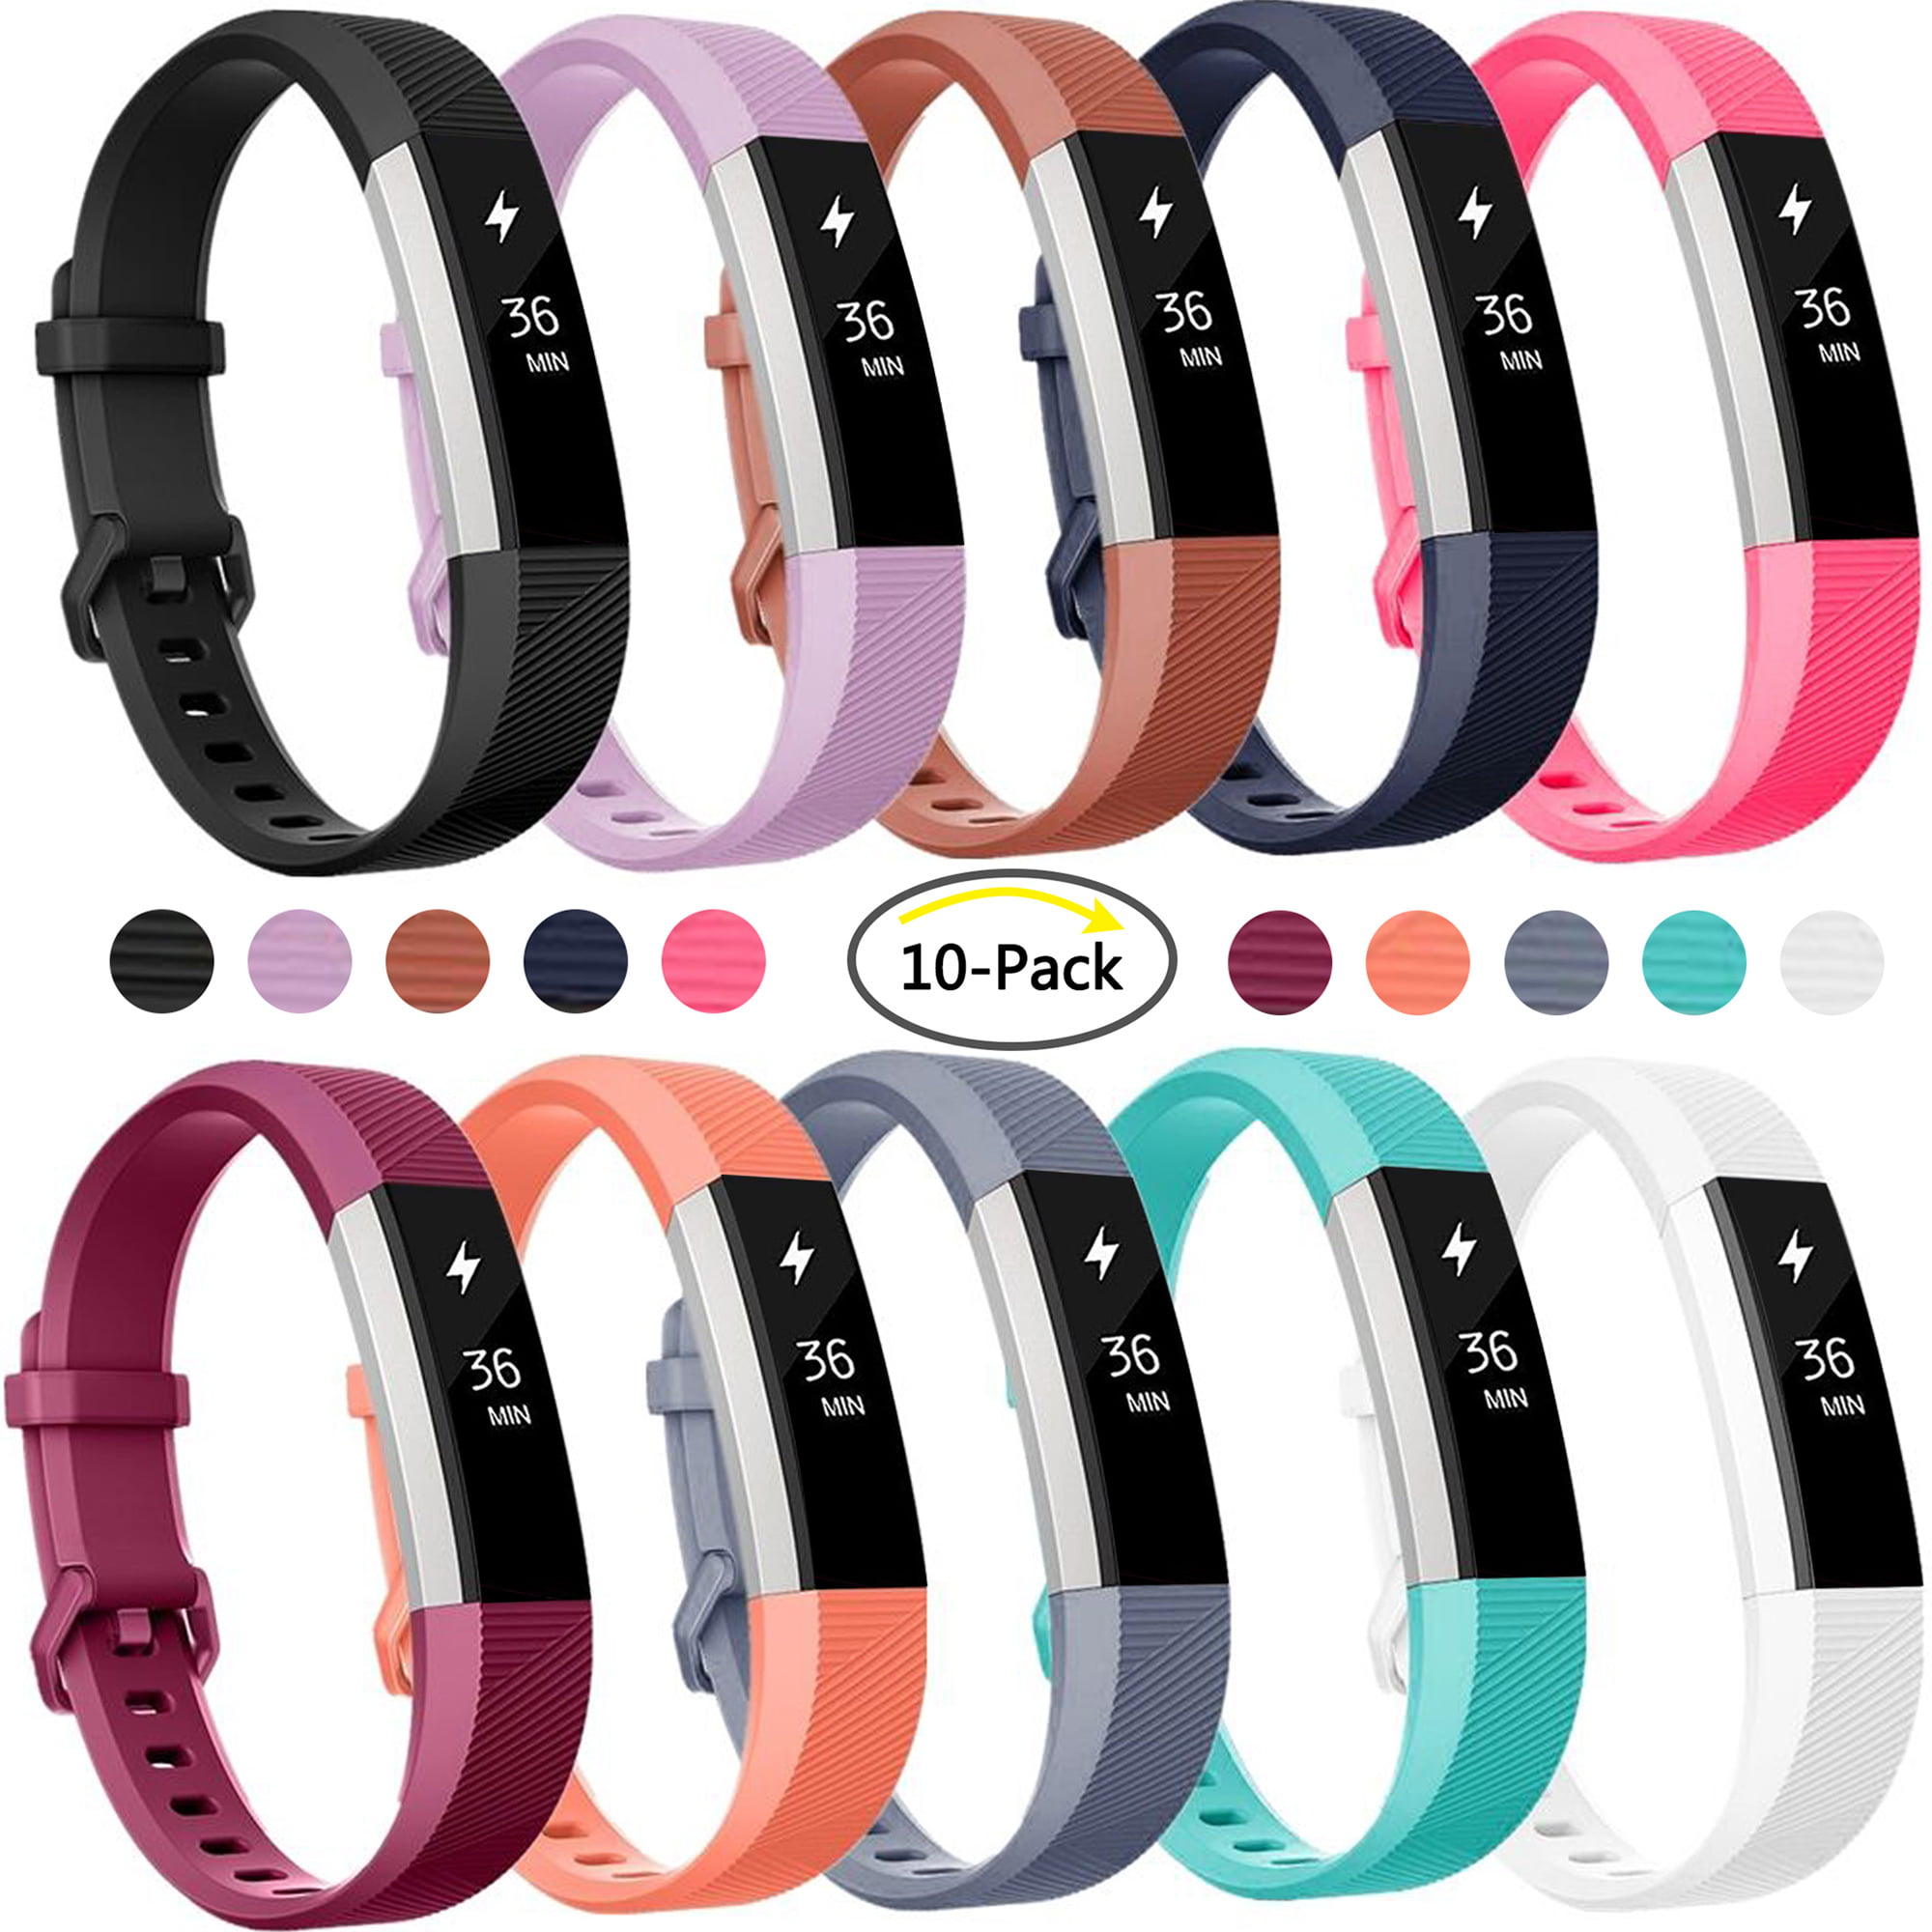 Replacement Wristband Band Silicone Bracelet W/ CLASSIC BUCKLE For Fitbit Alta 